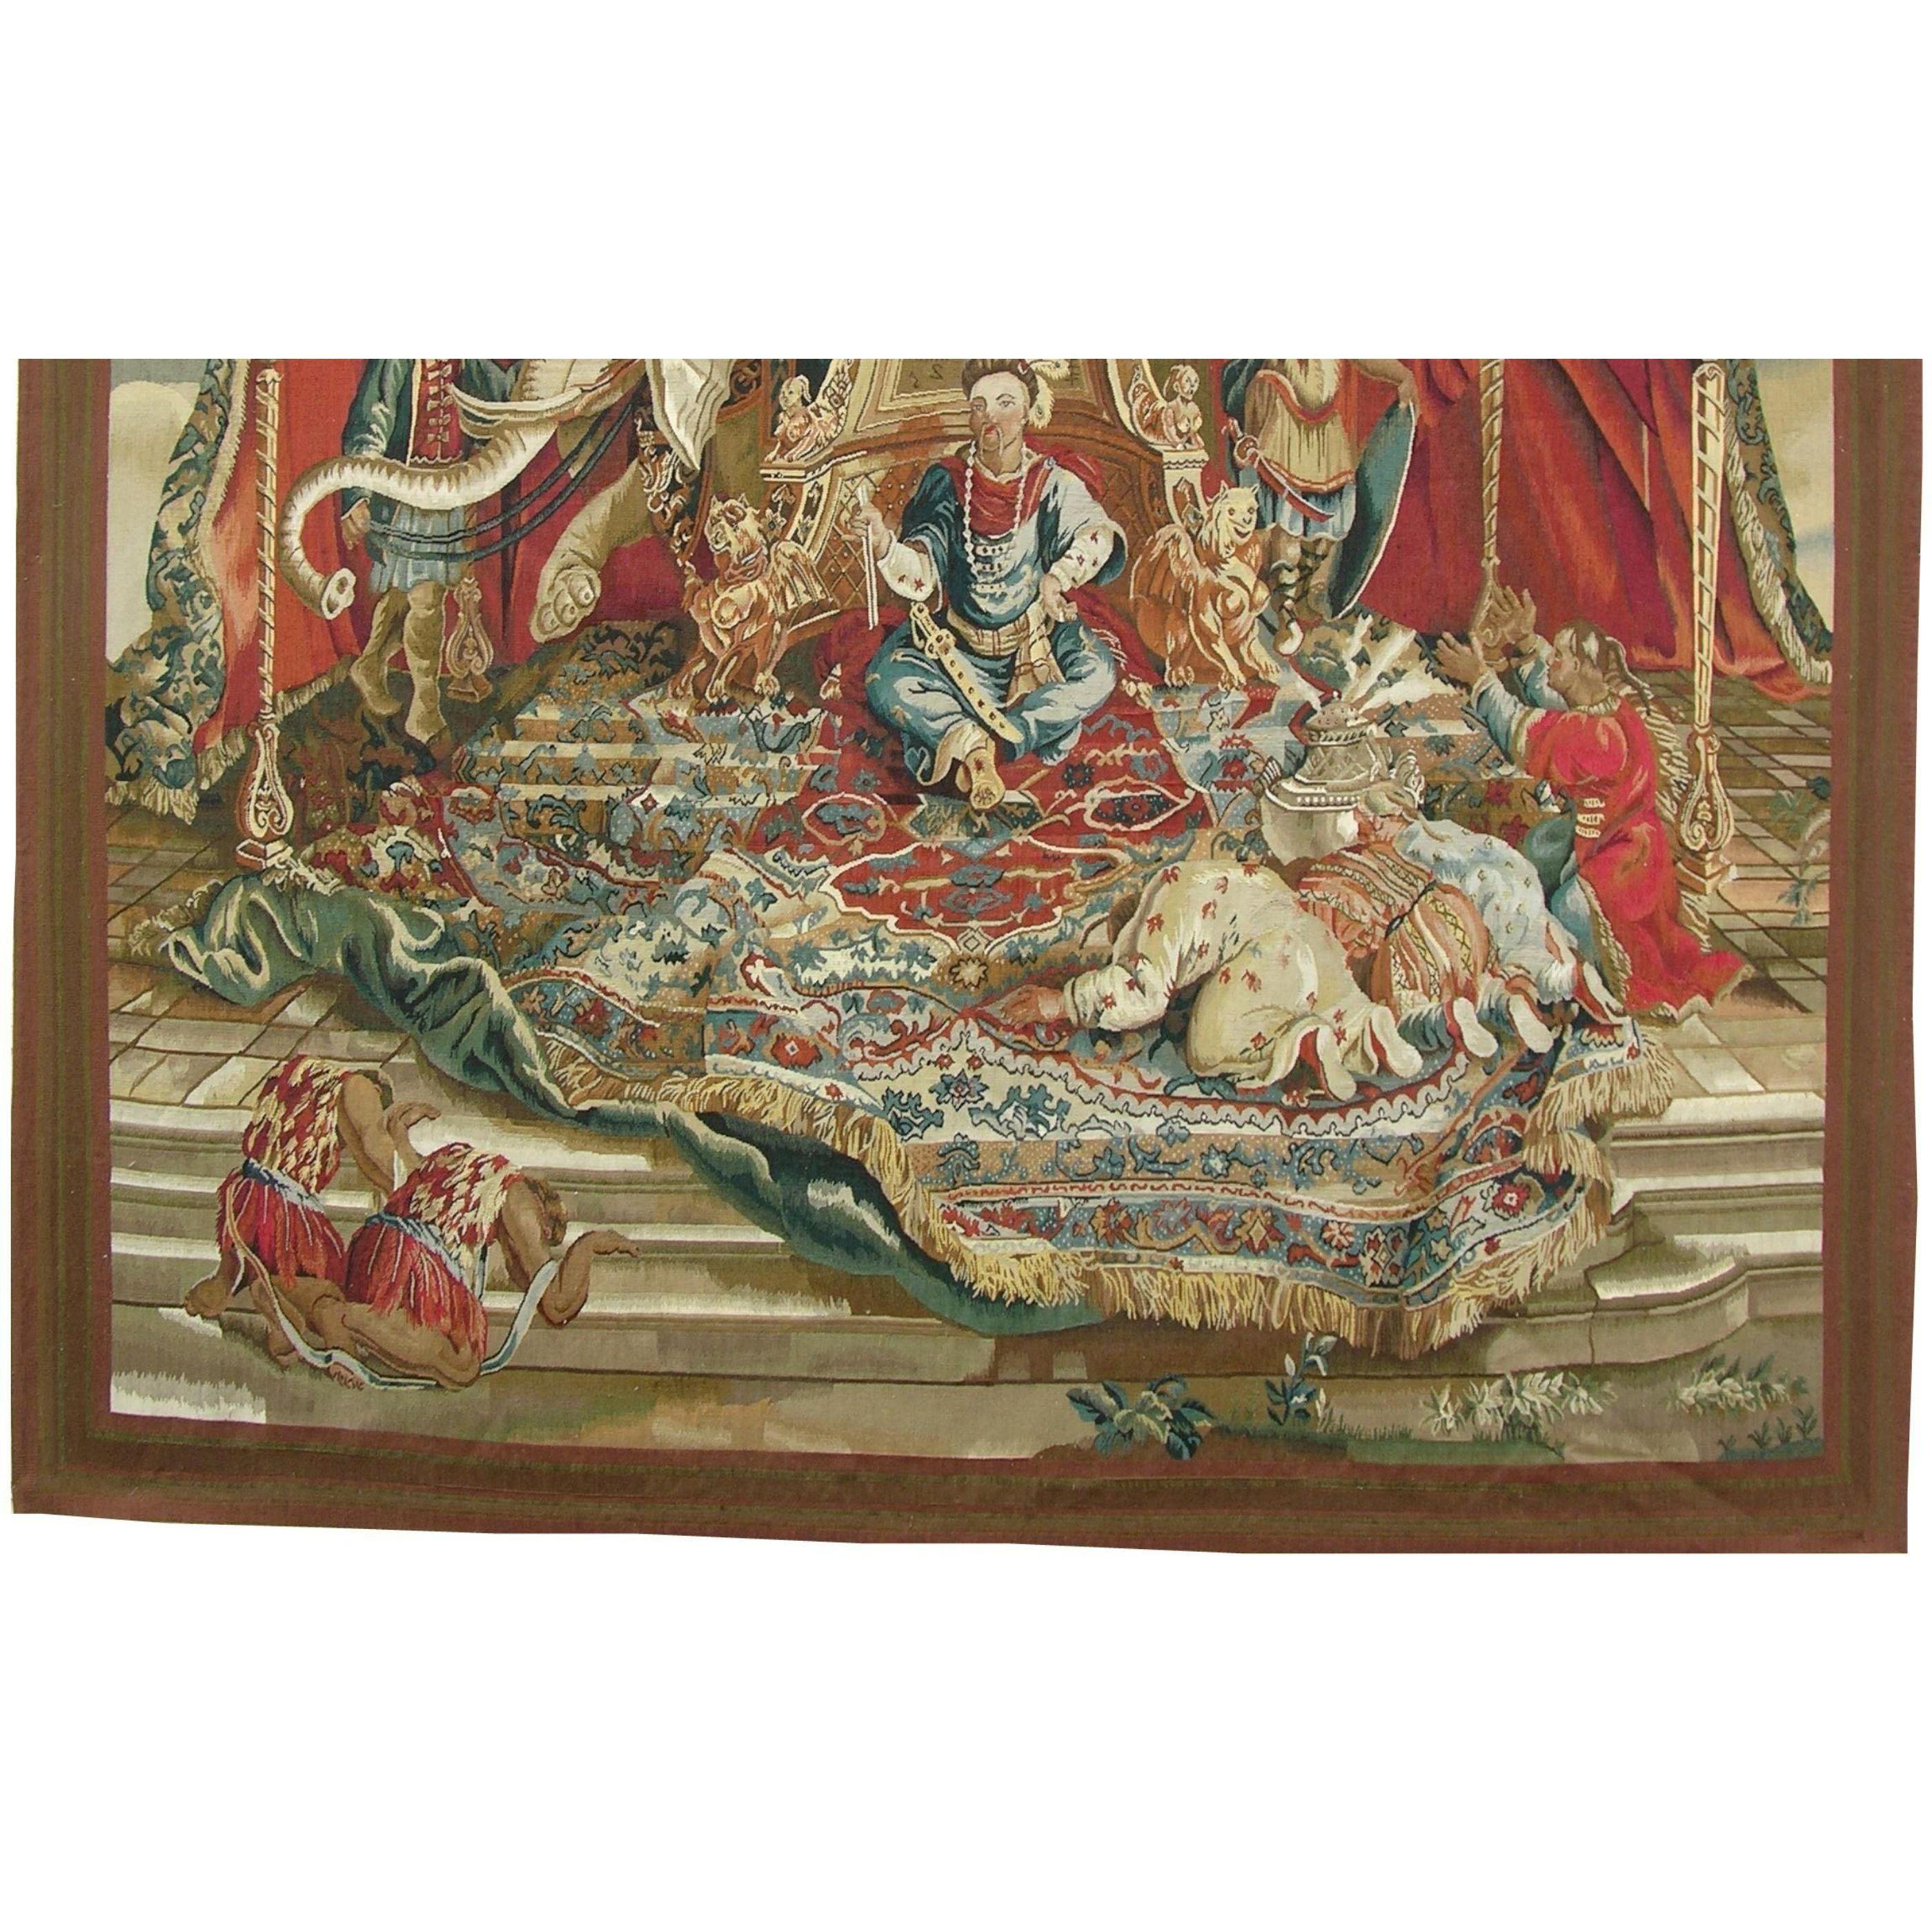 Unknown Vintage Tapestry Depicting King on the Throne 7'9